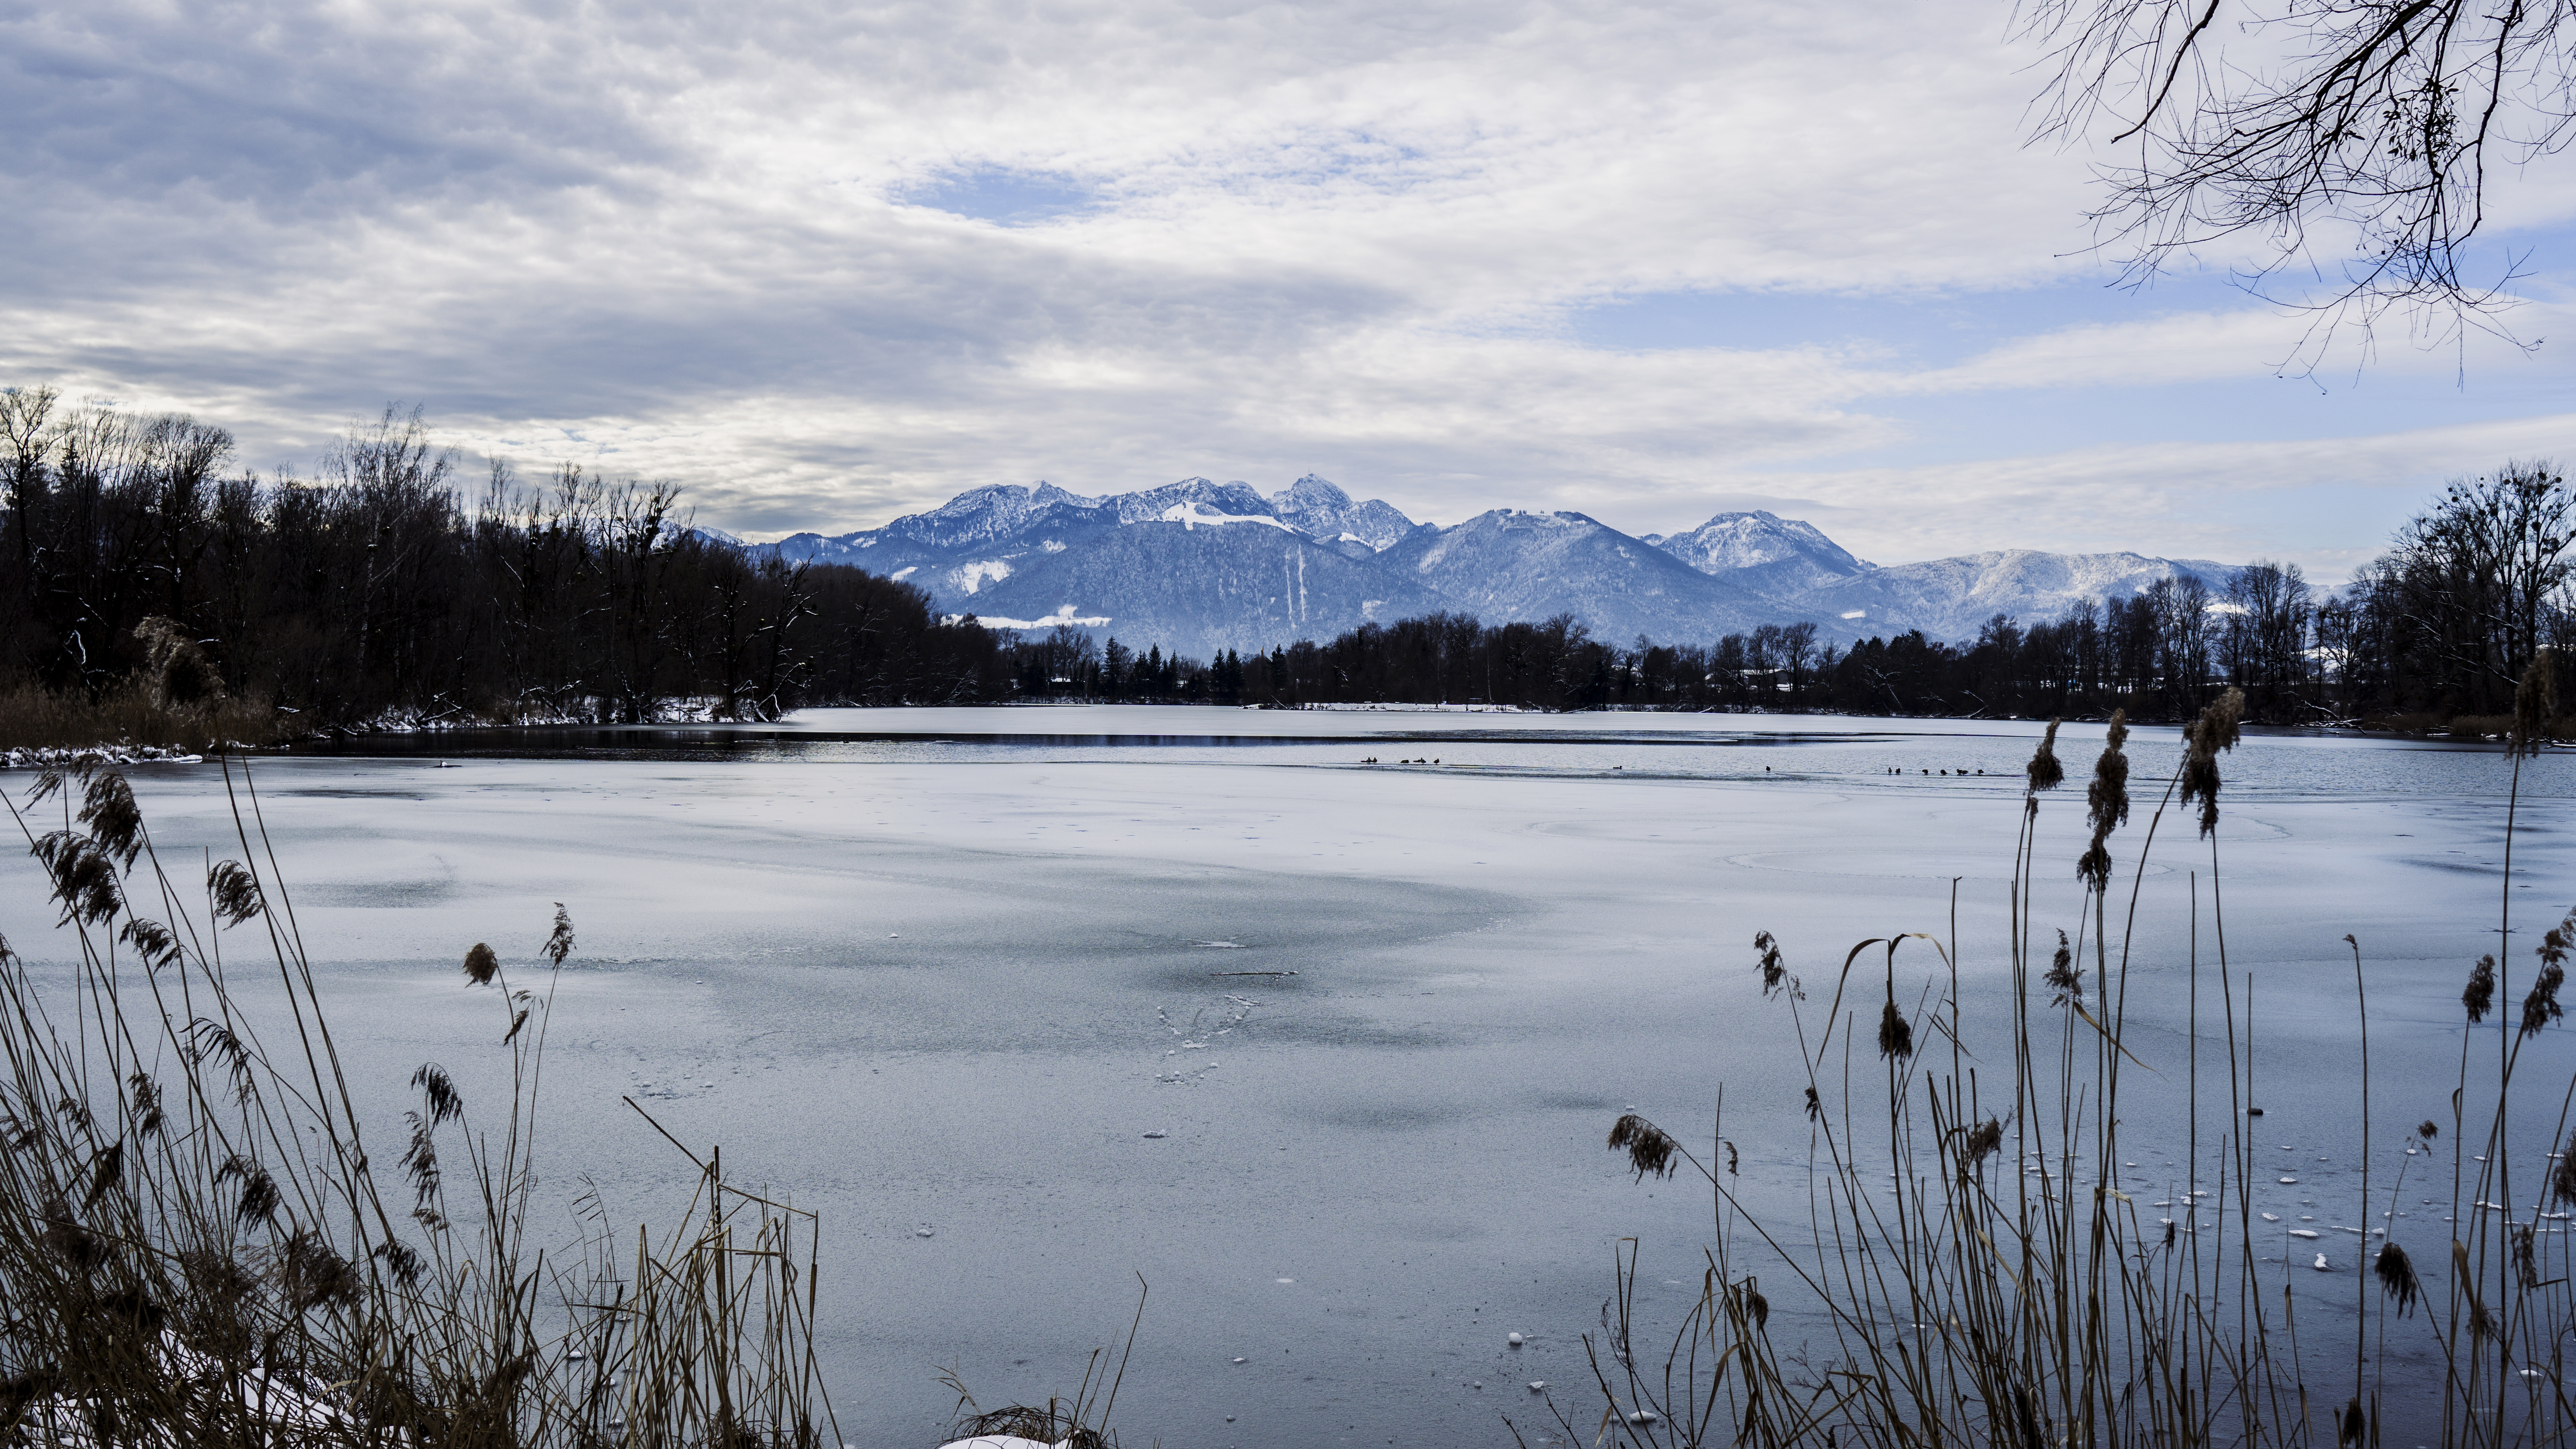 General 6000x3376 nature landscape snow winter lake frozen lake trees clouds mountains outdoors wide angle